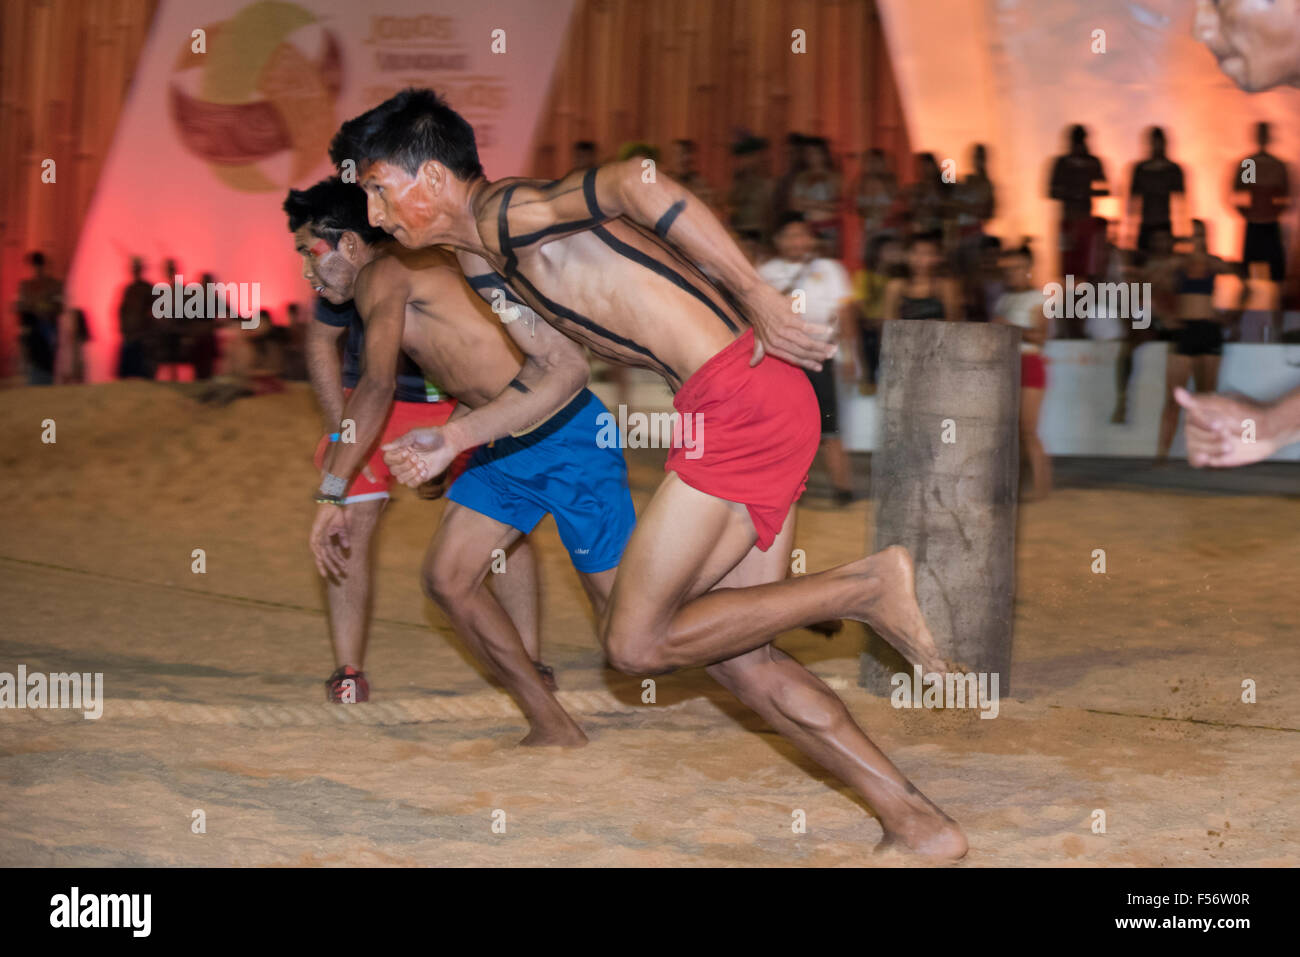 Palmas, Brtazil. 28th Oct, 2015. Contestants make a flying start in the 100 metres second round at the International Indigenous Games, in the city of Palmas, Tocantins State, Brazil. Credit:  Sue Cunningham Photographic/Alamy Live News Stock Photo